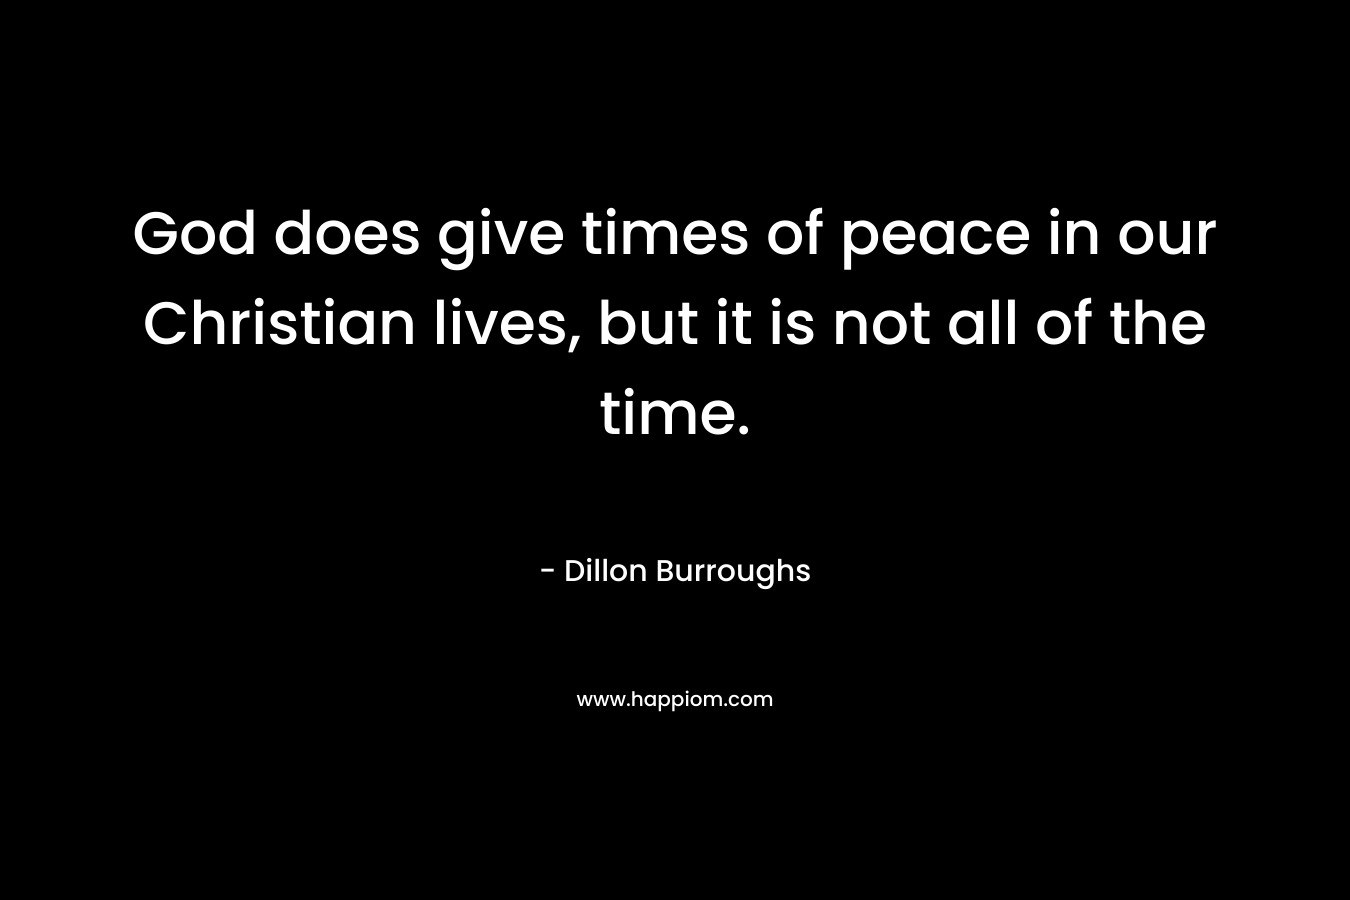 God does give times of peace in our Christian lives, but it is not all of the time.